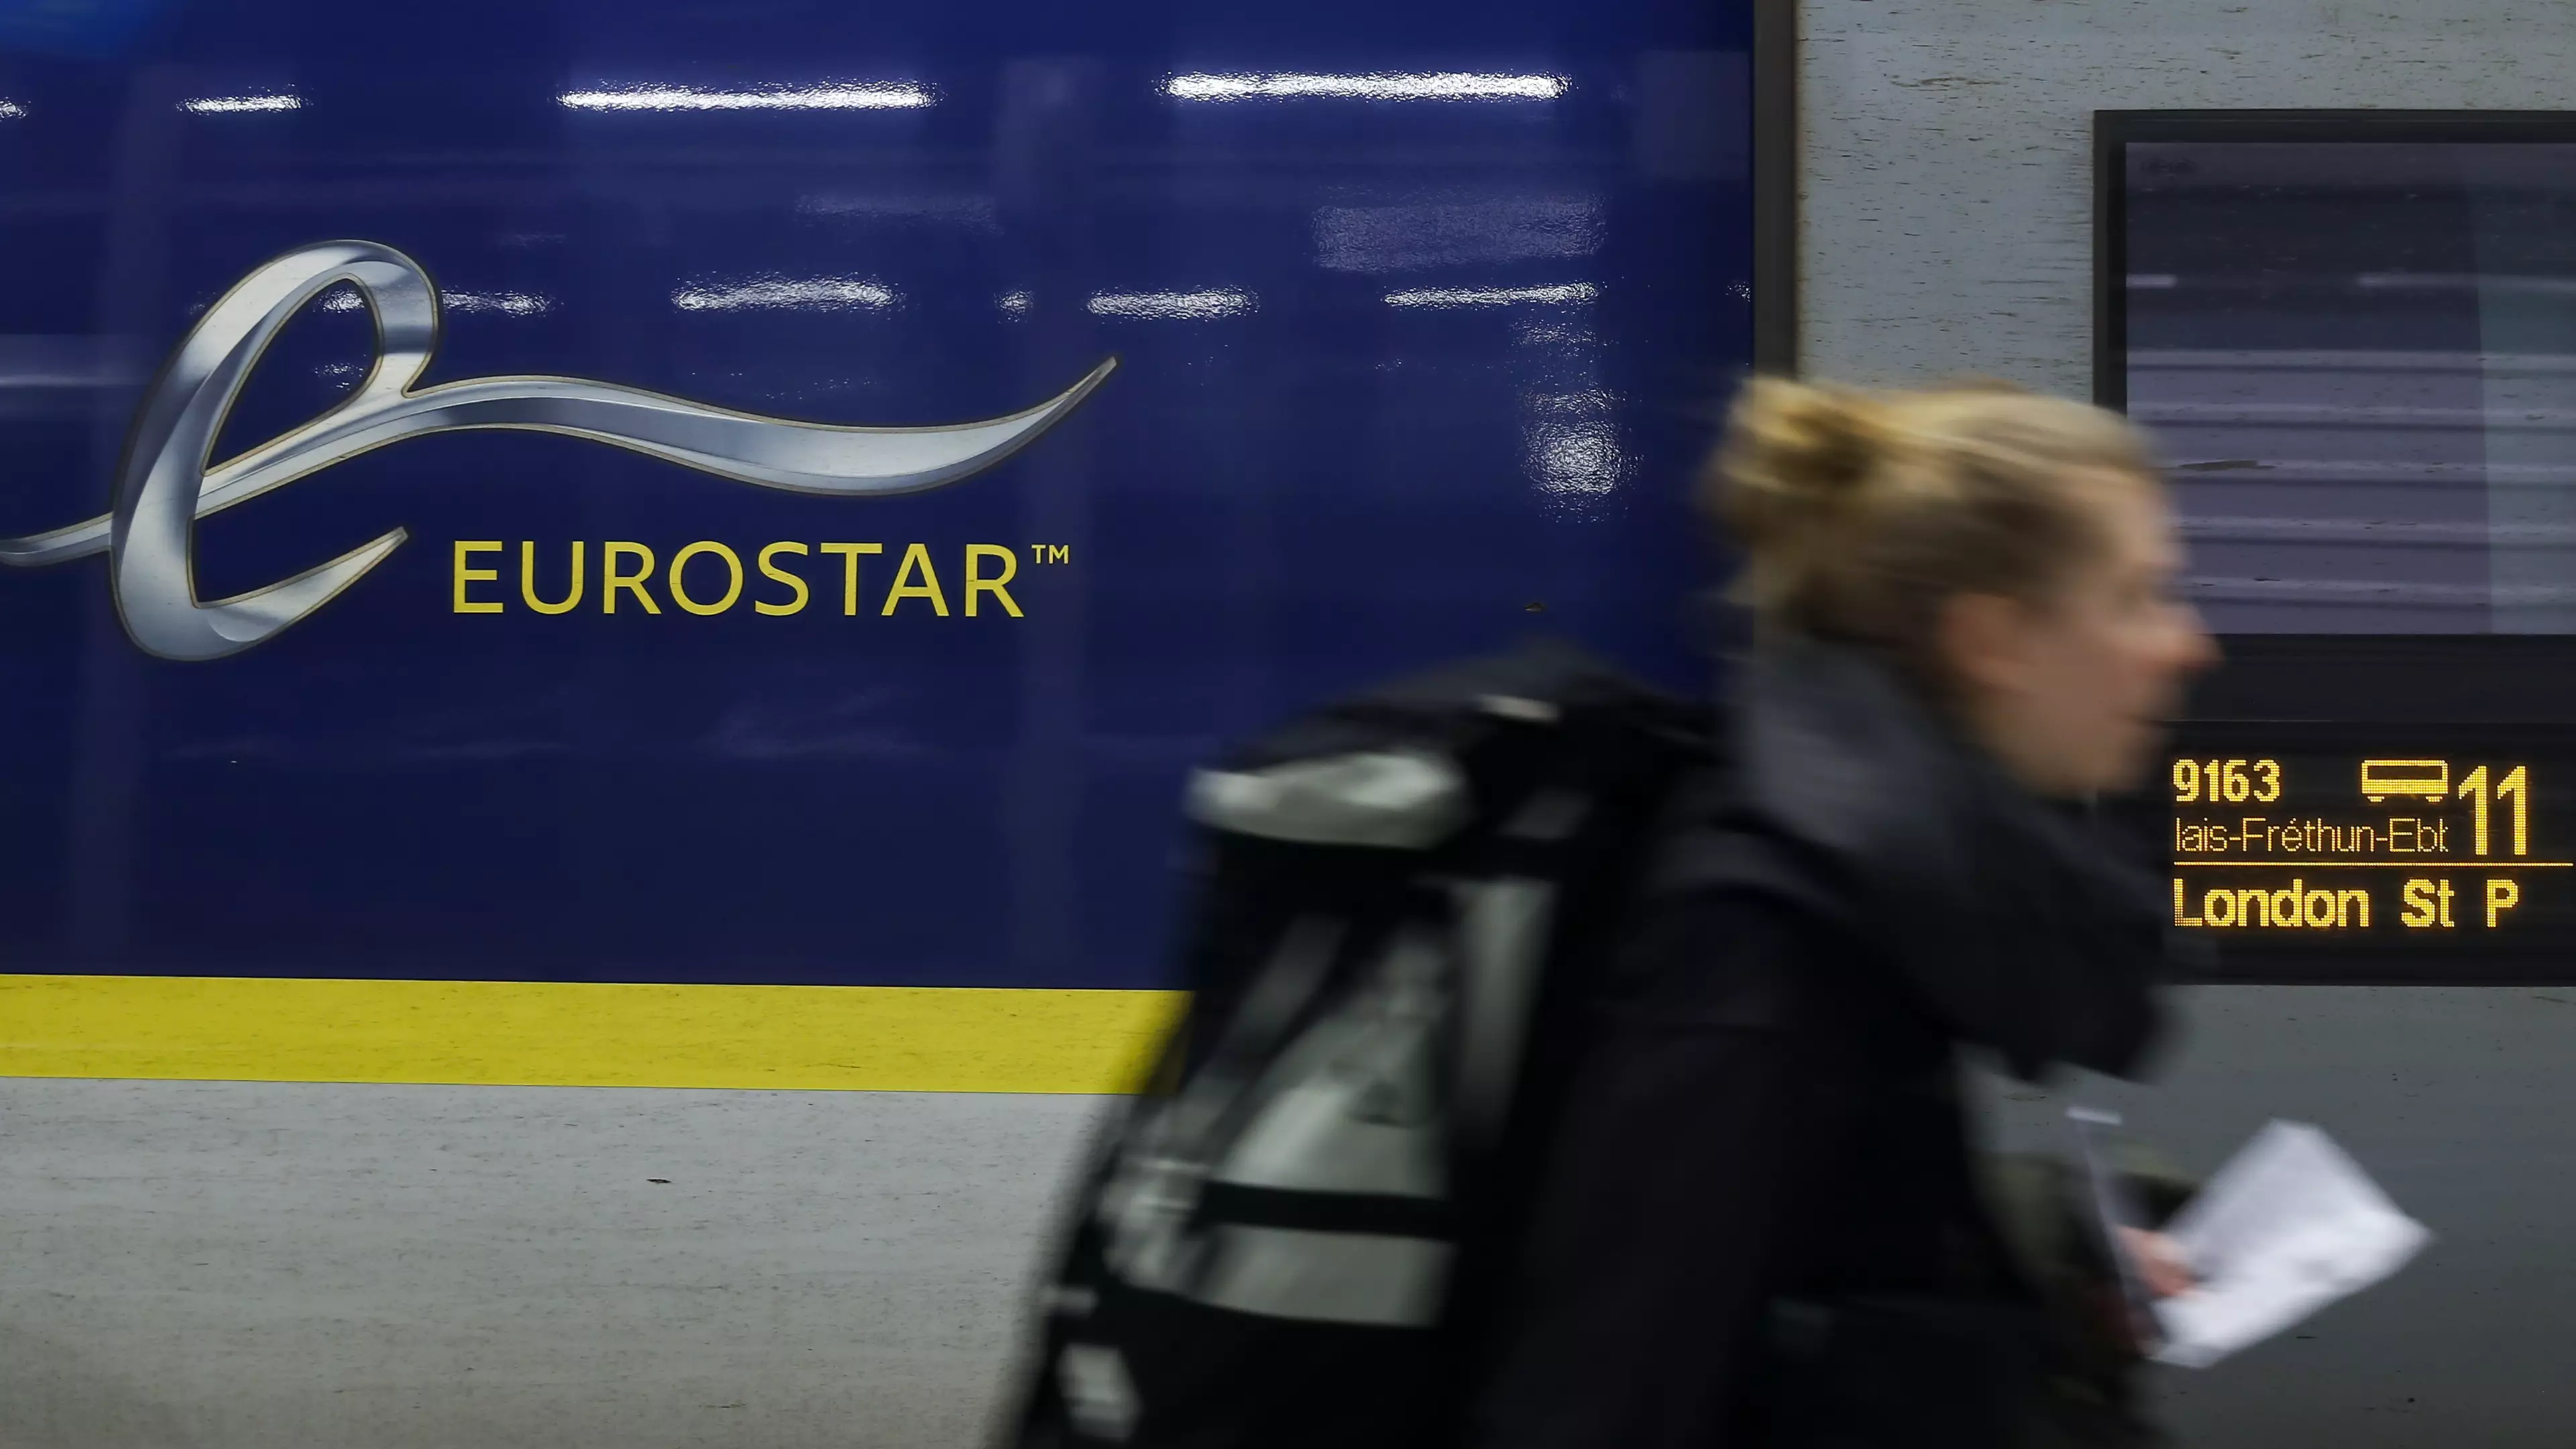 Eurostar Finally Launching Direct Trains From London To Amsterdam With £40 Fares